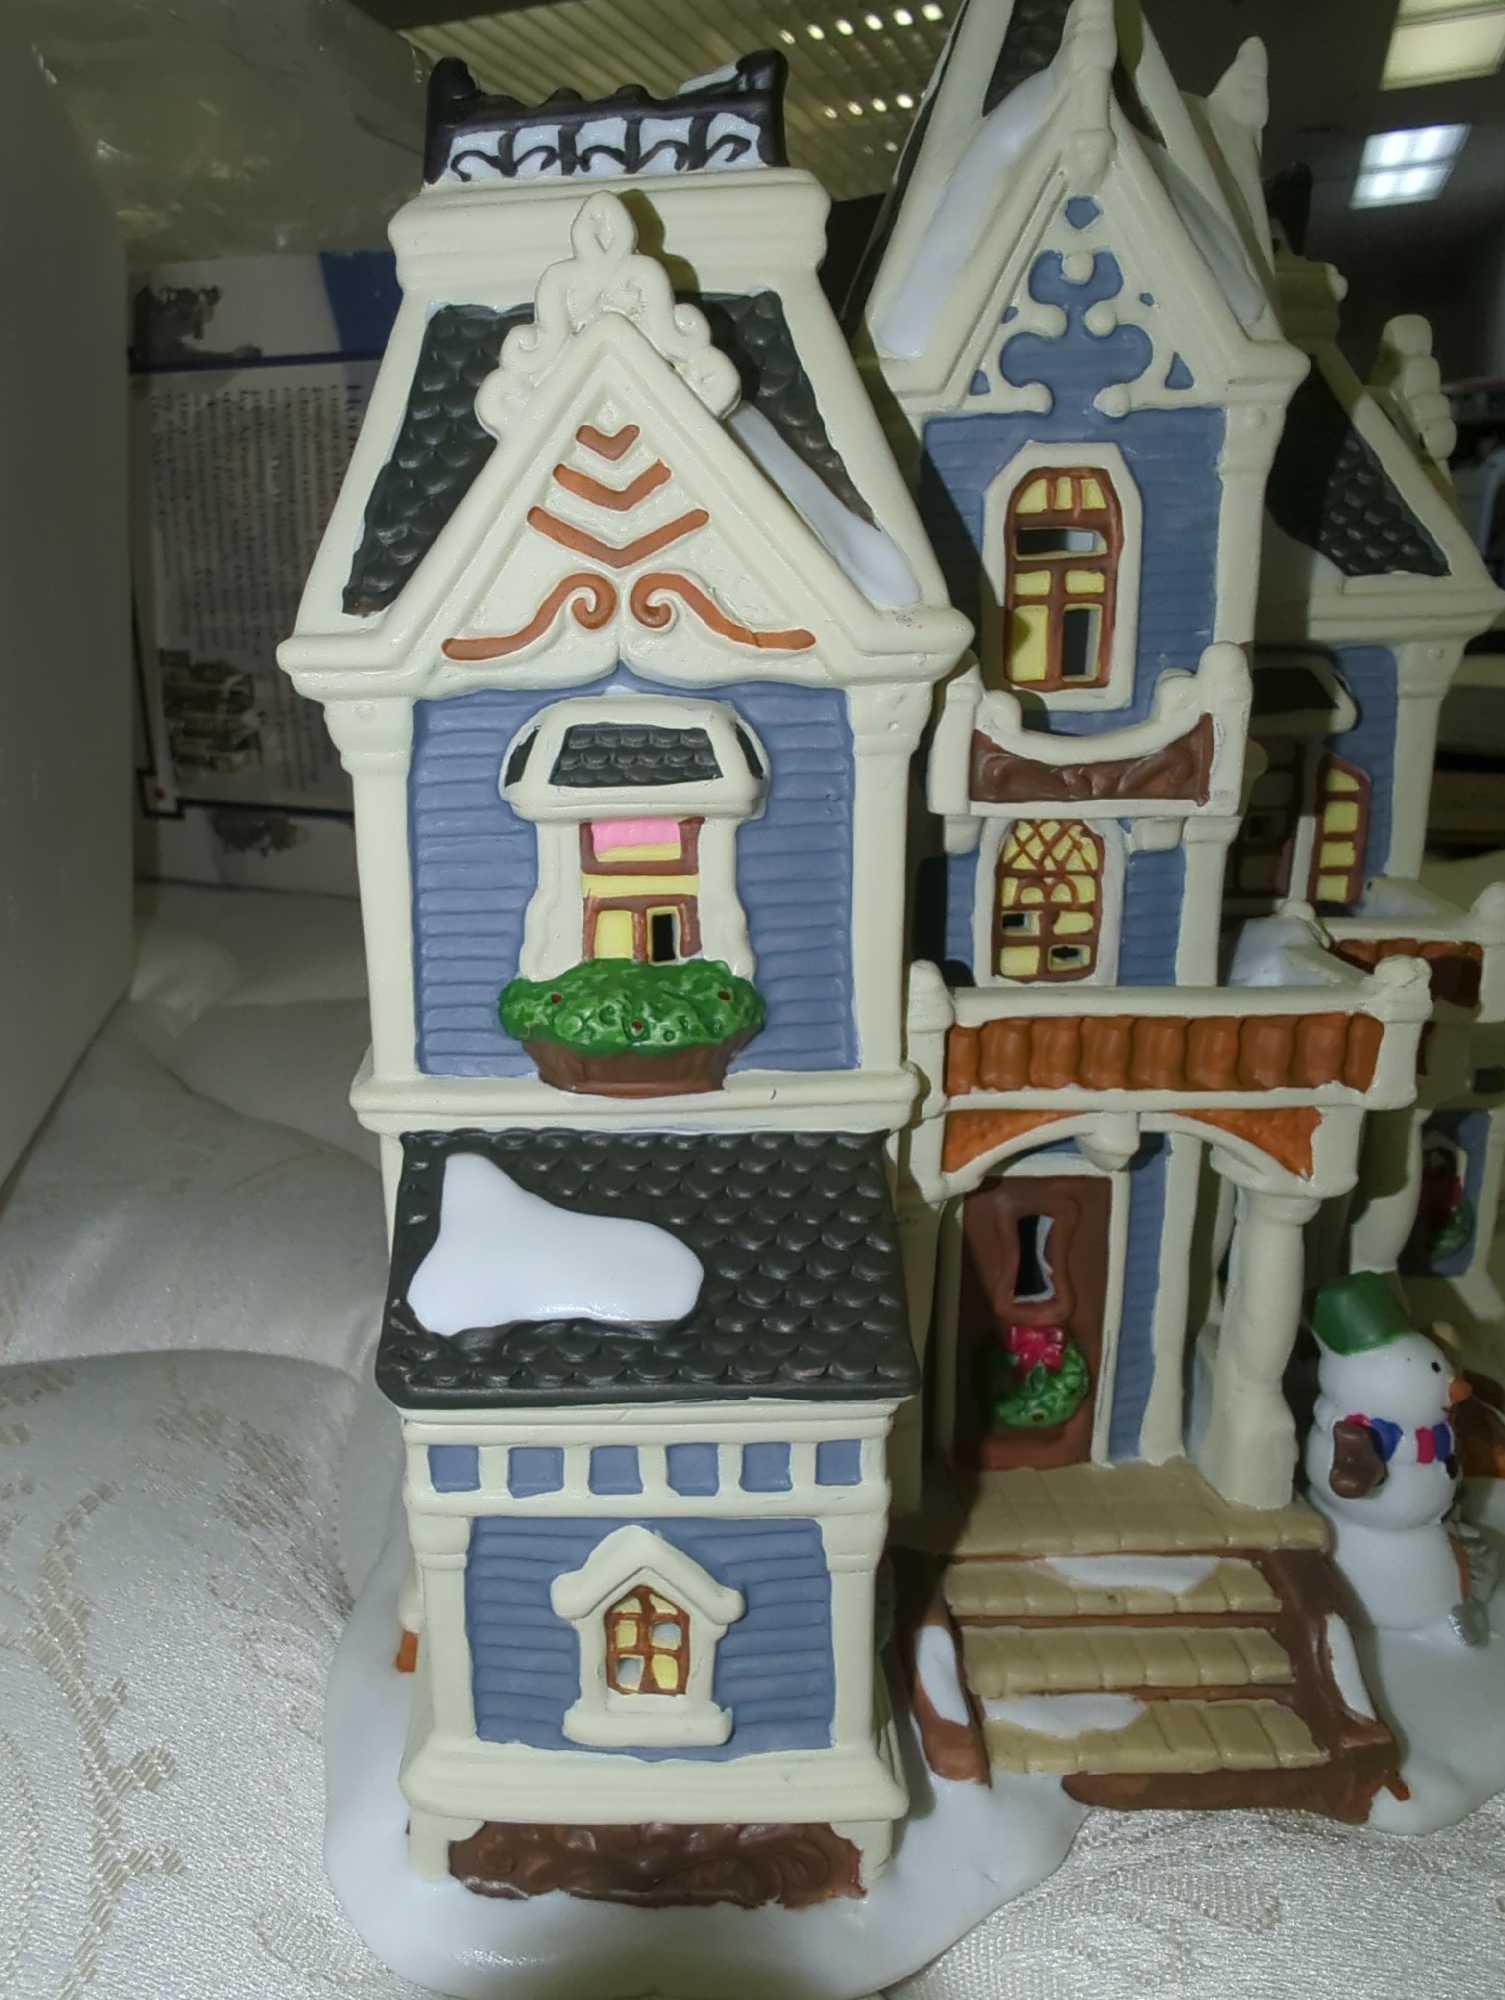 2004 CAROLE TOWNE COLLECTION Porcelain "Holland House" Village House, In Original Box, Retail Price